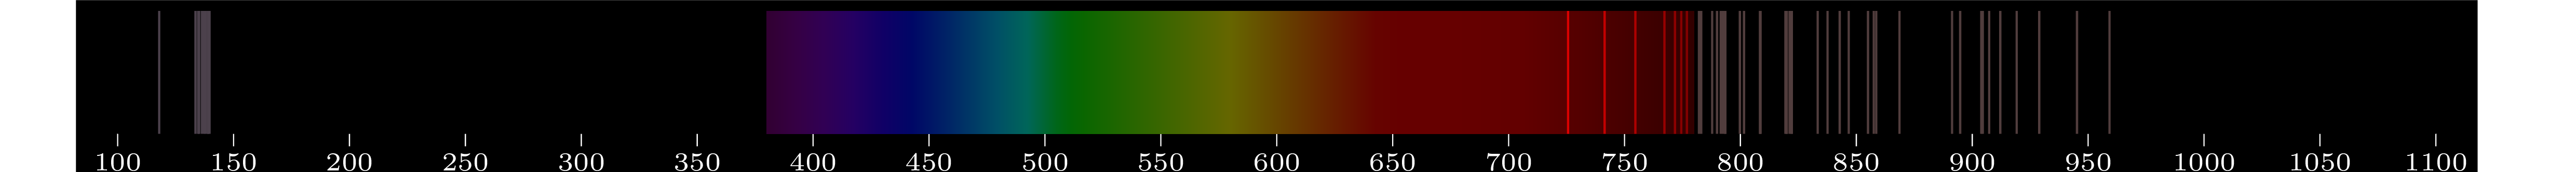 emmision spectra of element Cl